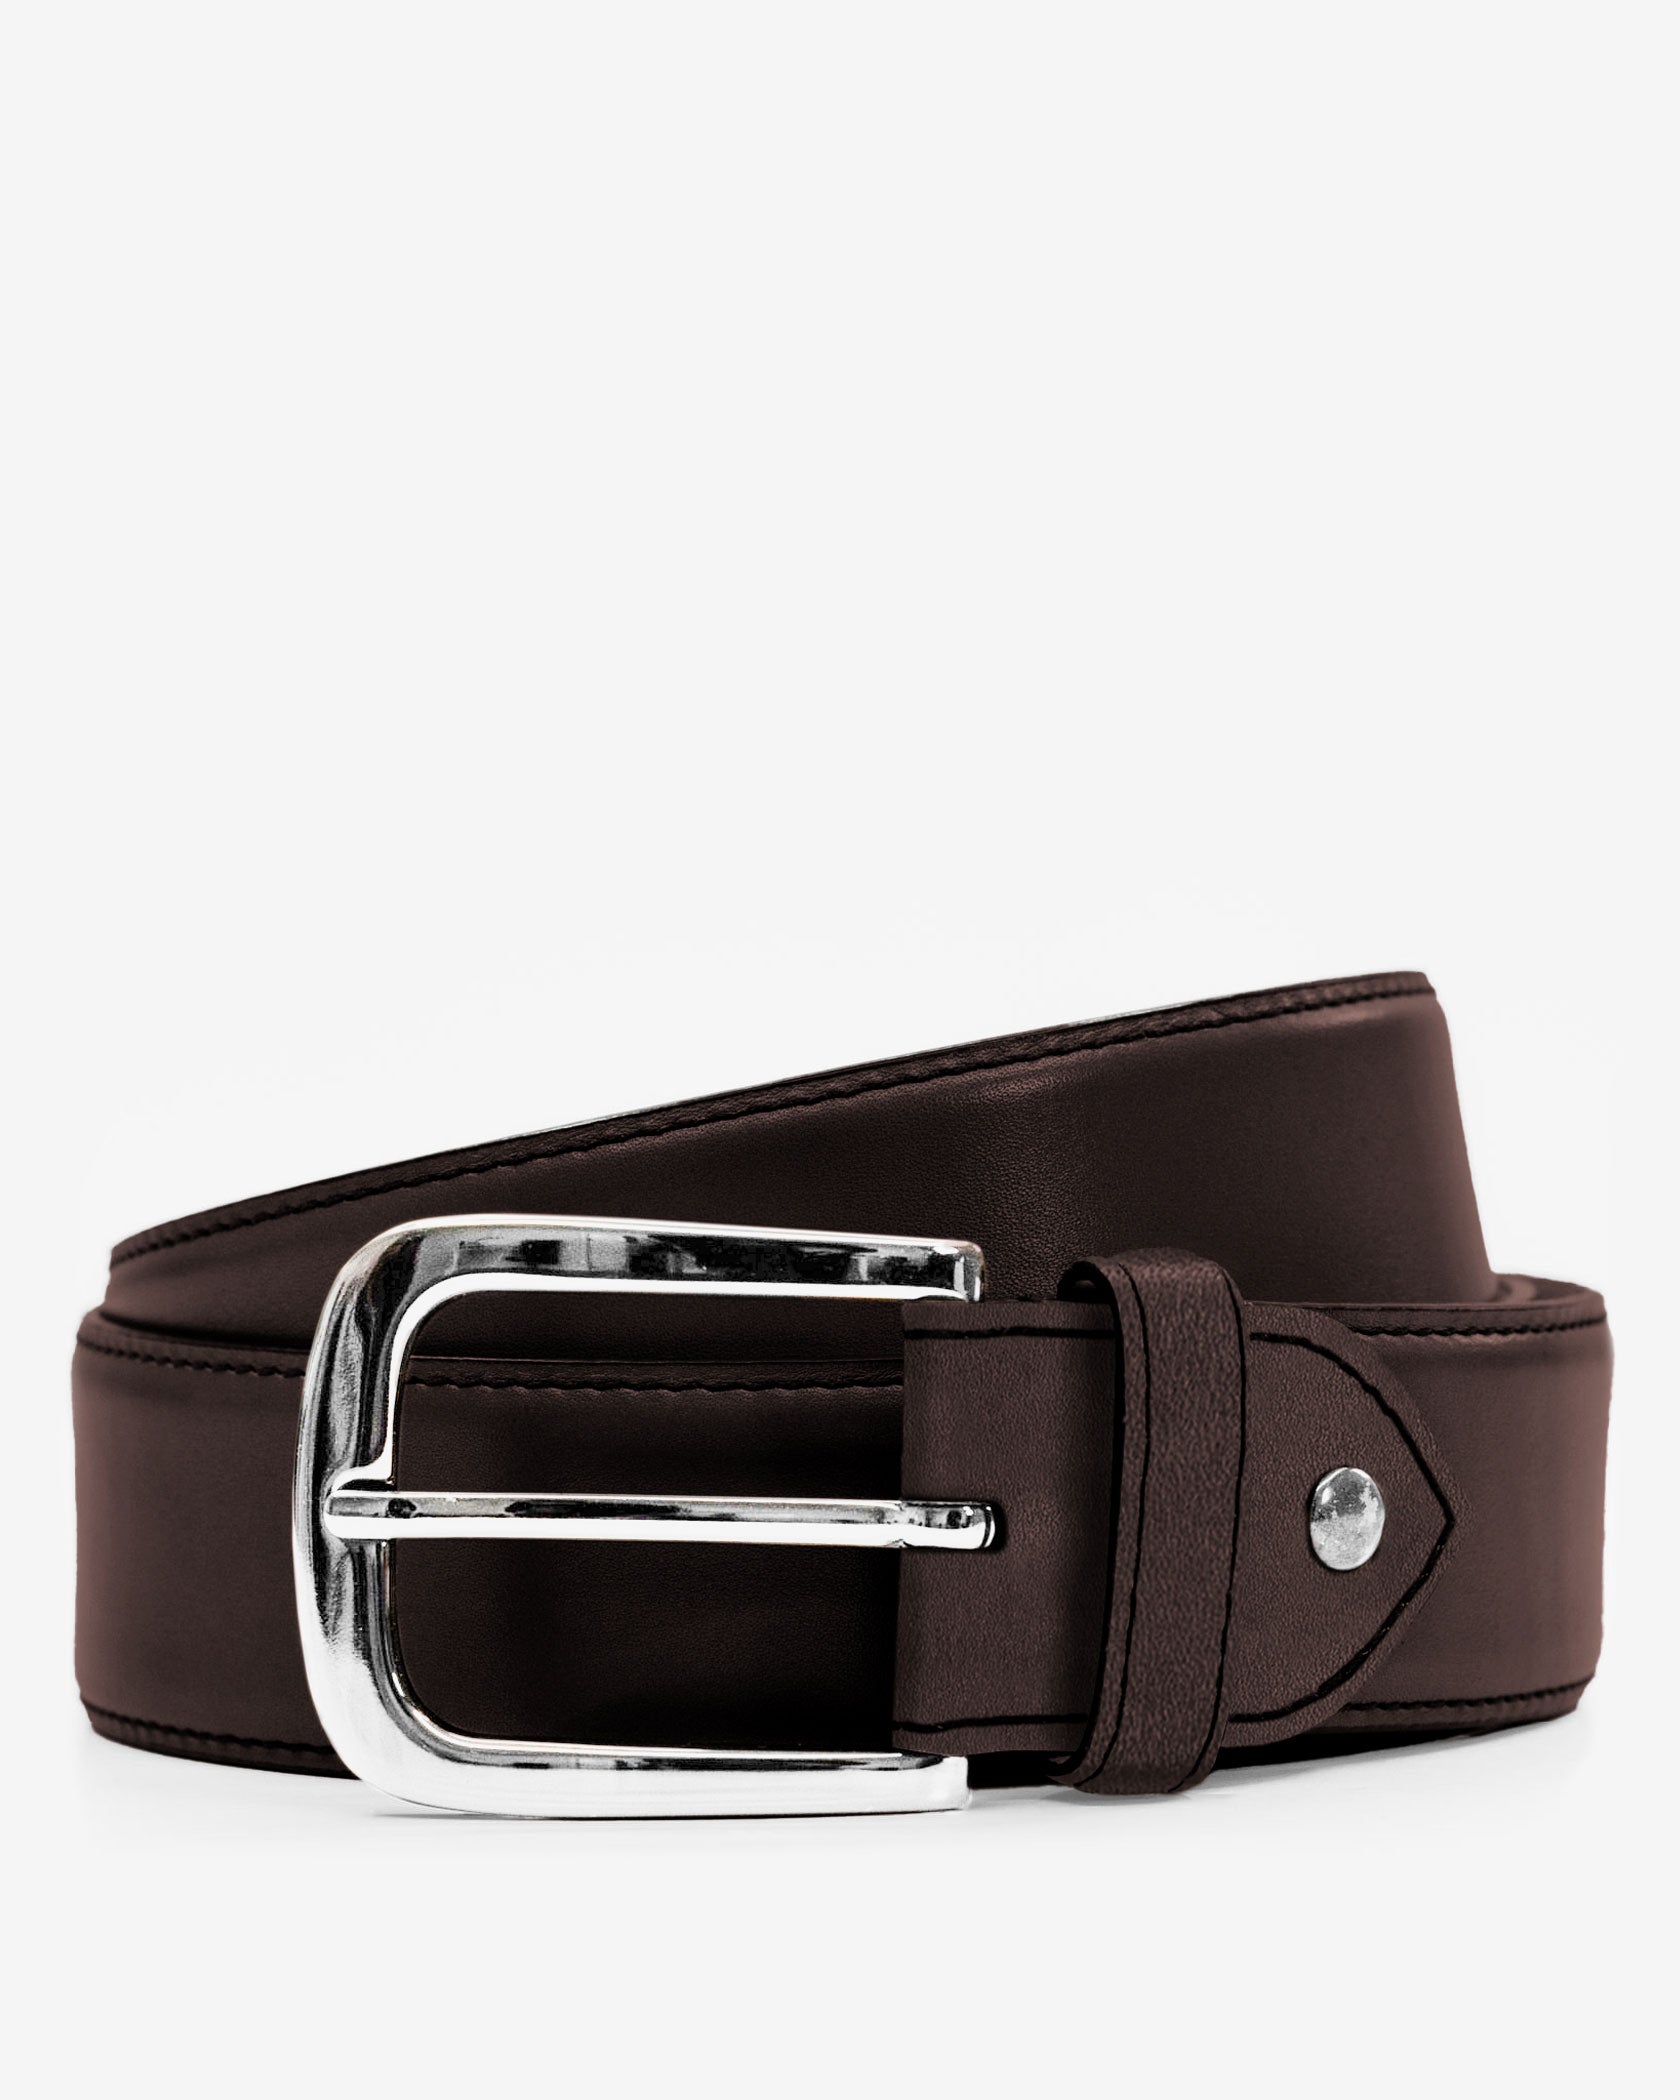 The S/001PW Signature Leather Belt